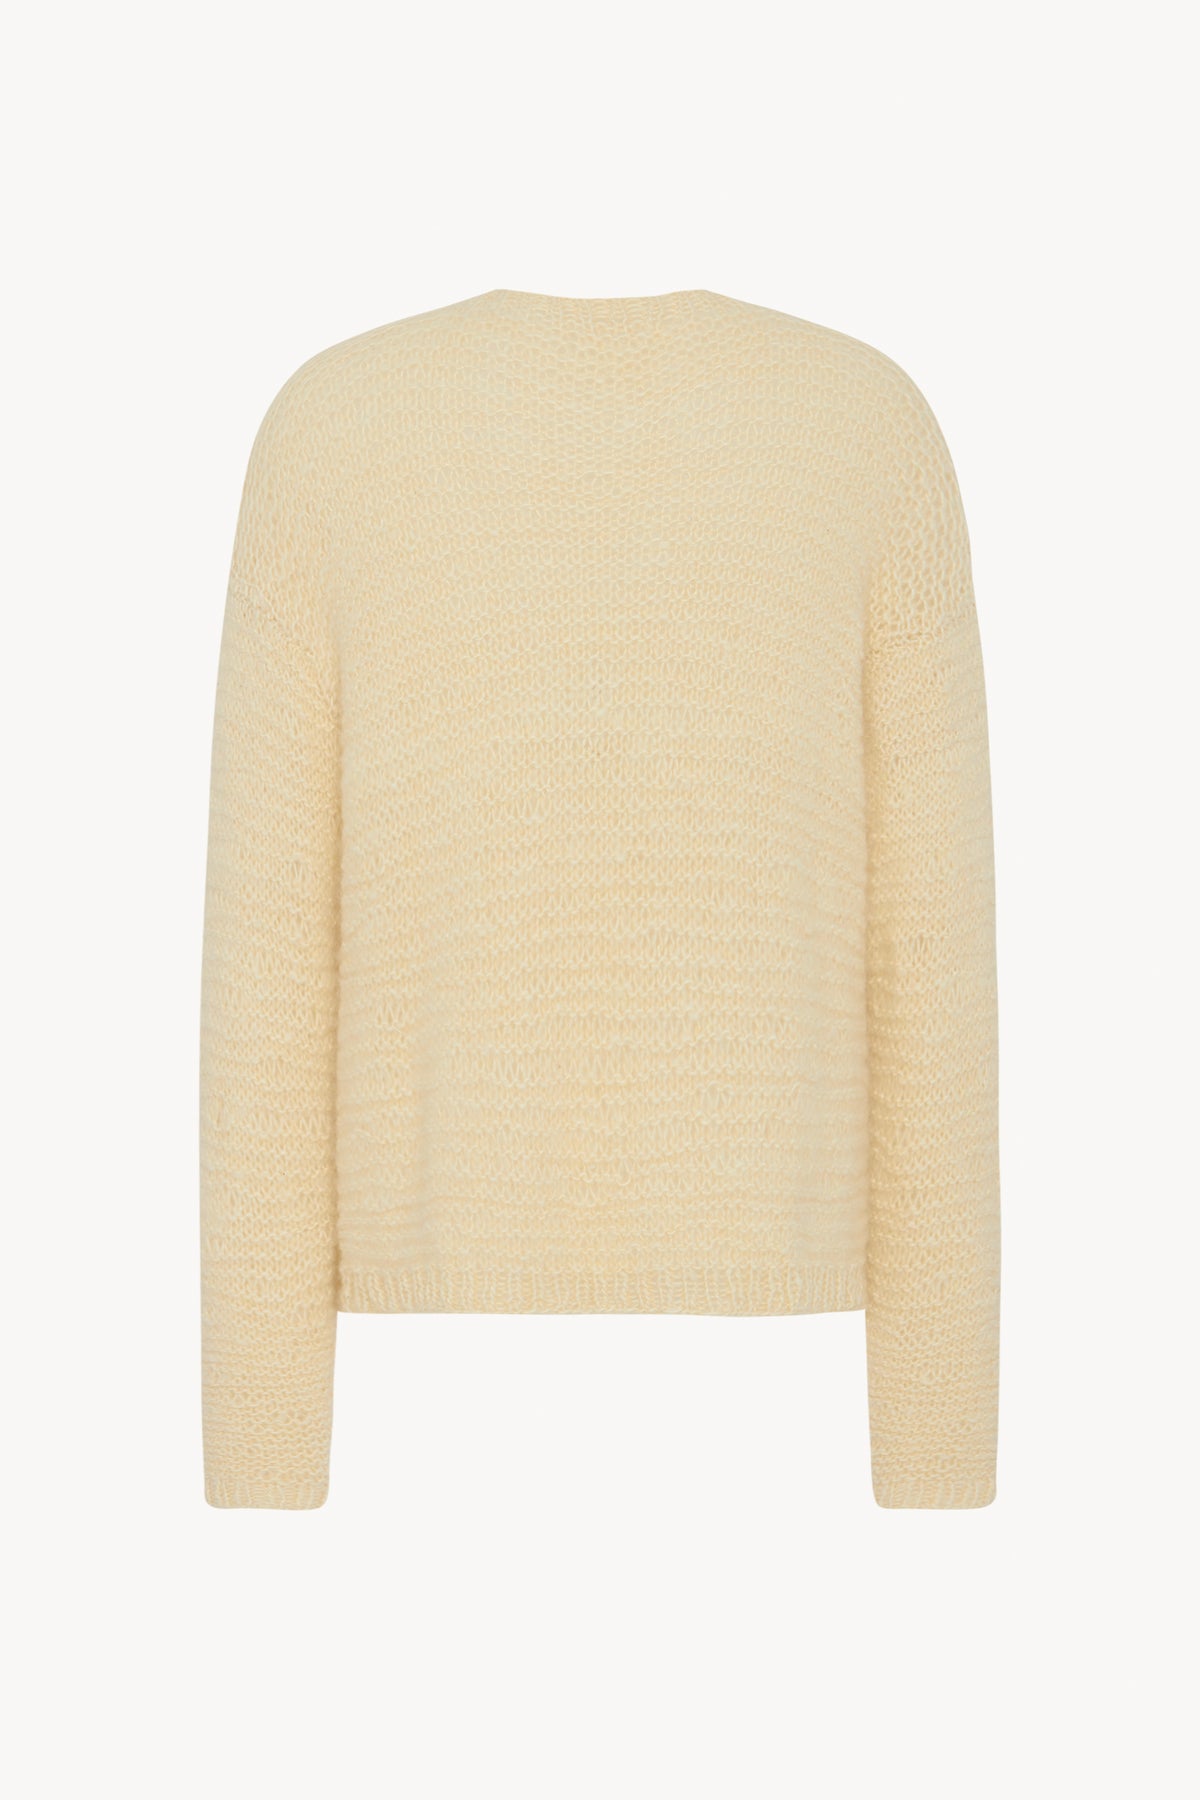 Amst Top in Cashmere